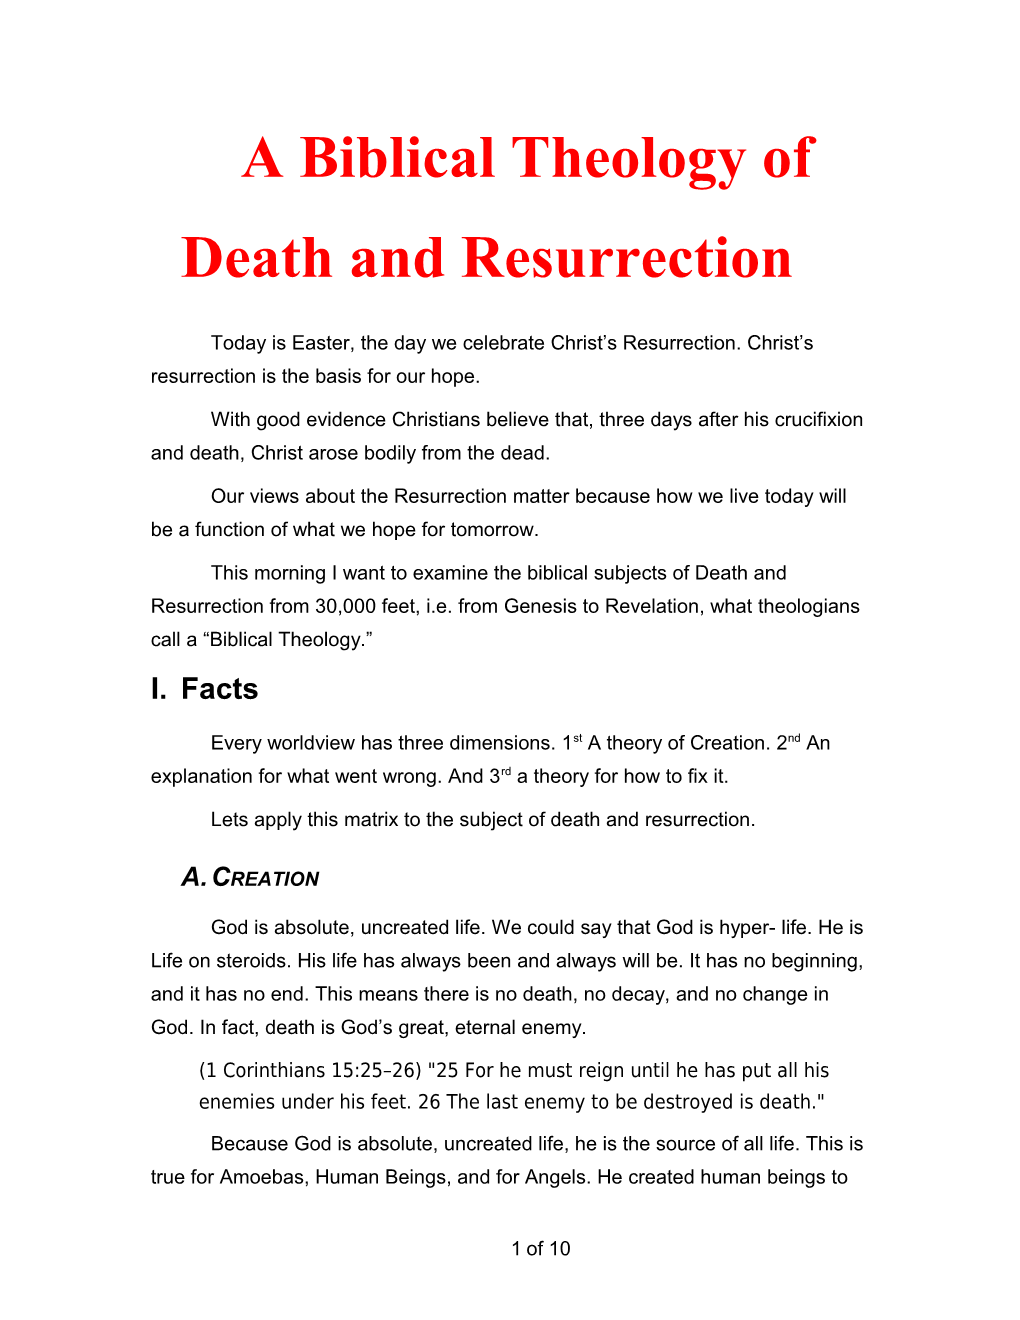 A Biblical Theology of Death and Resurrection